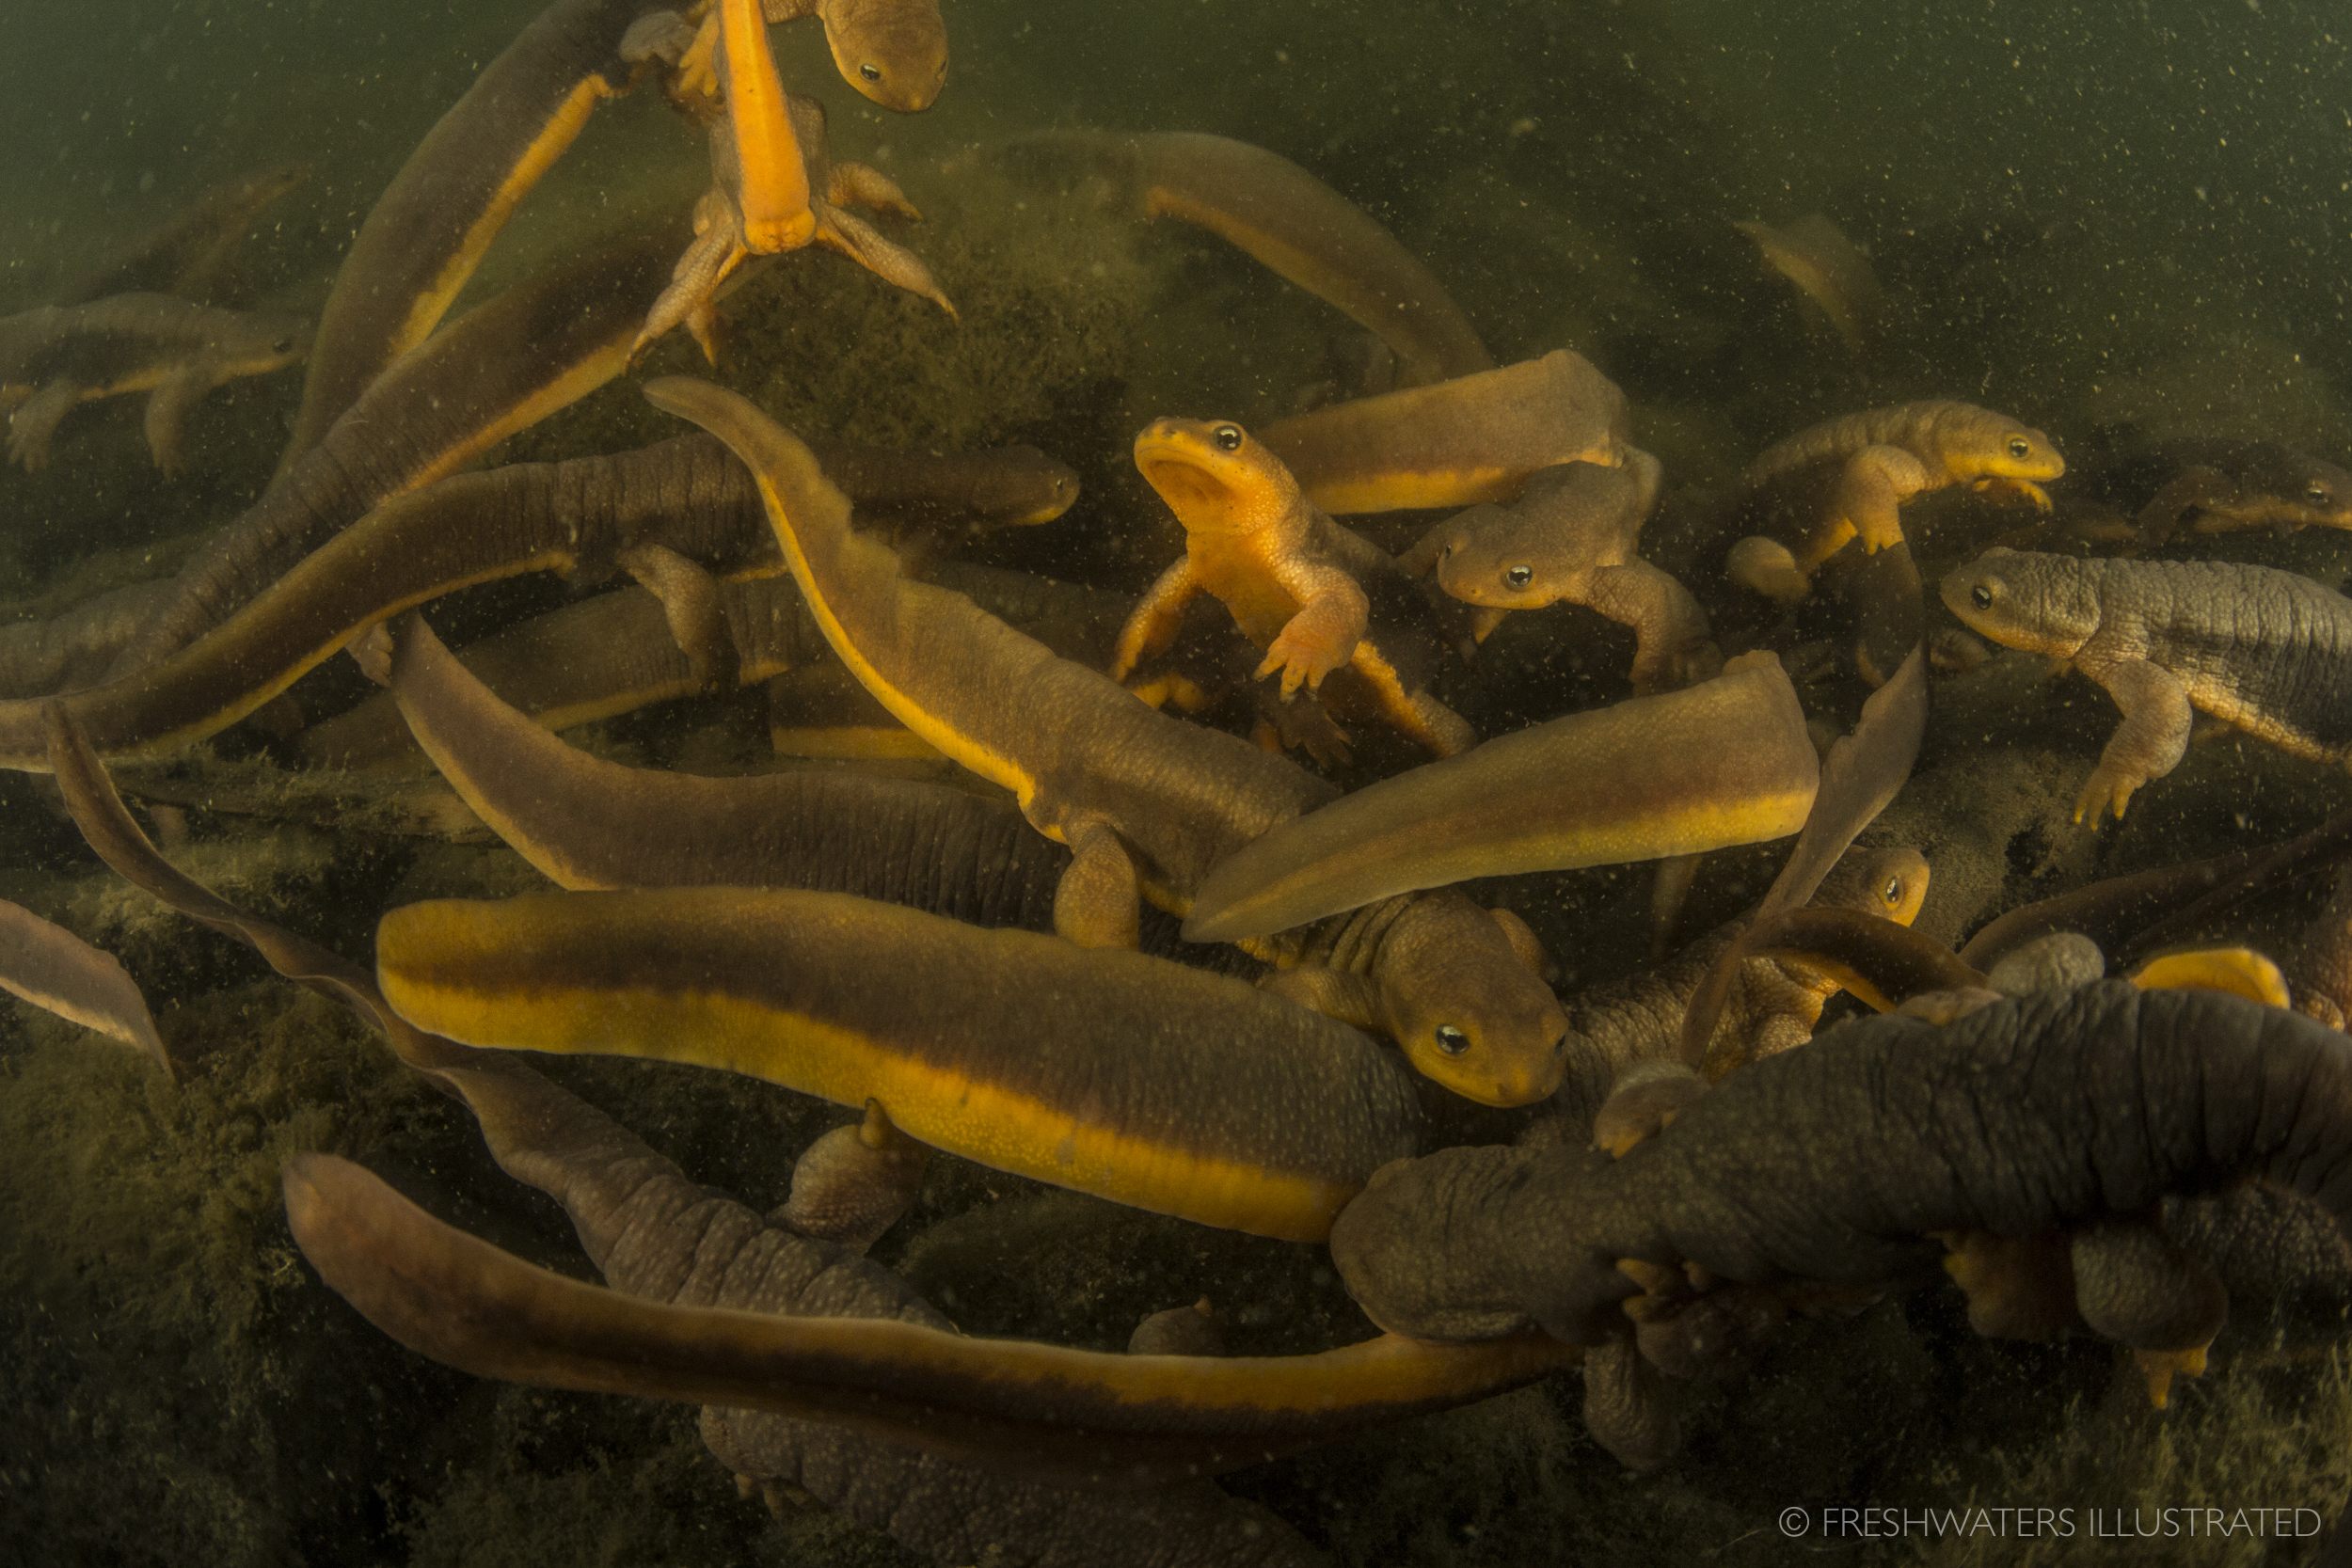  Rough skinned newts (Taricha granulosa) gather in a Coast Range pond to mate in early spring. Coast Range pond, Oregon  www.FreshwatersIllustrated.org  